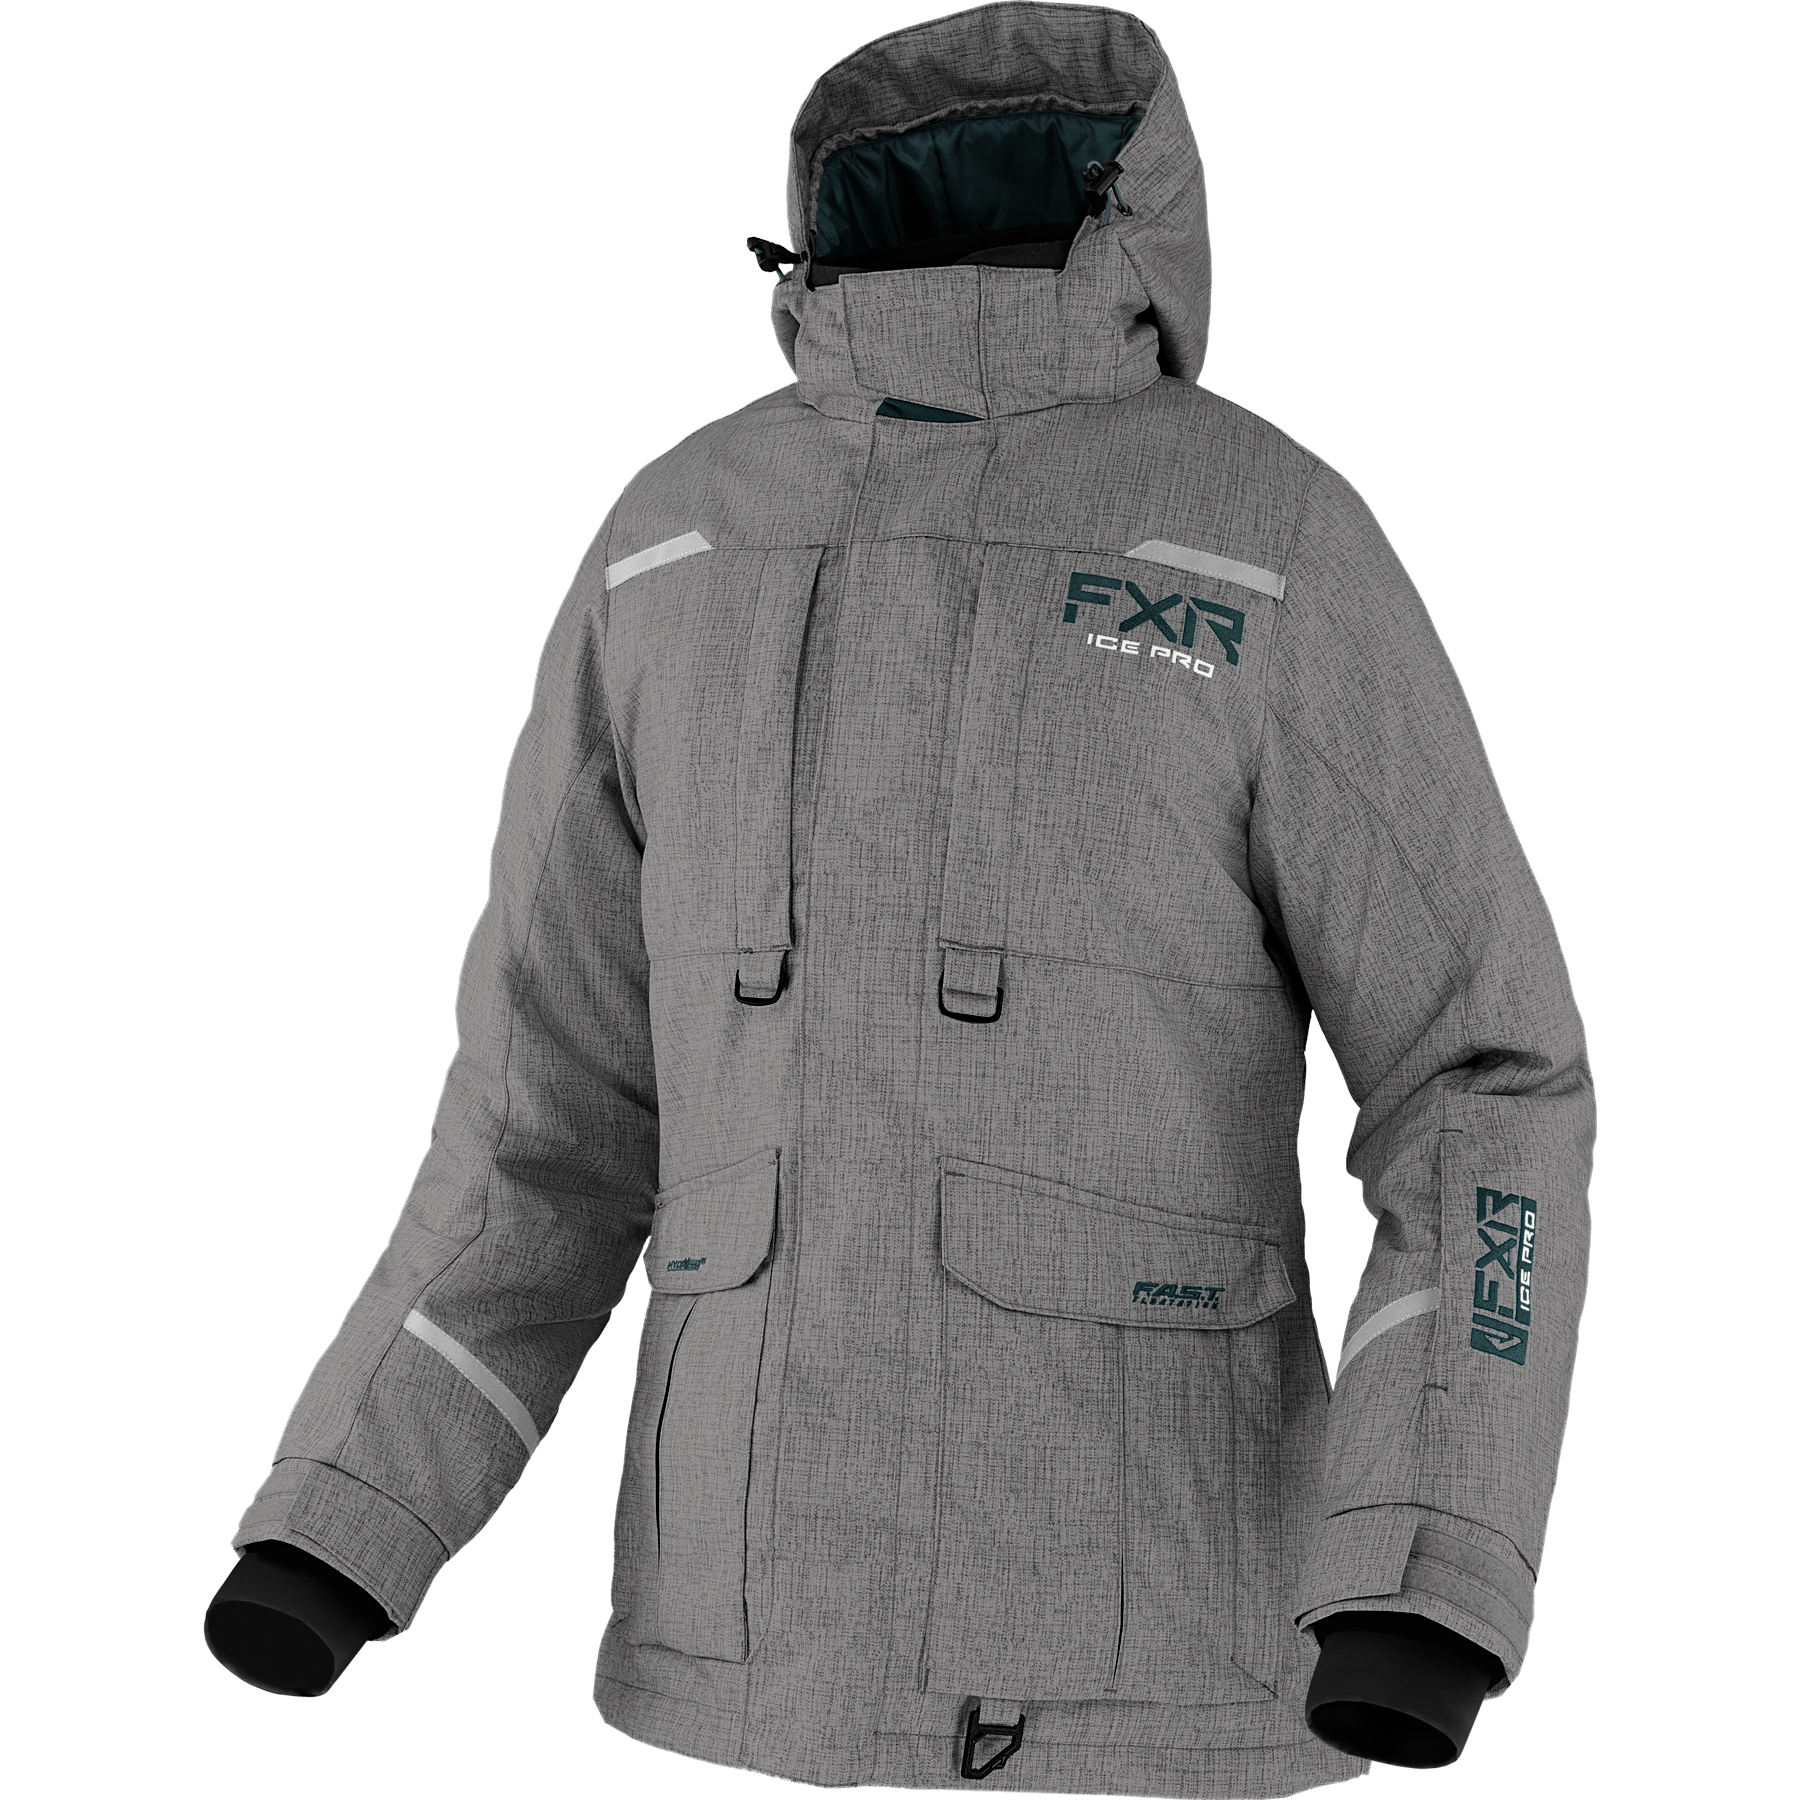 fxr racing jackets  excursion ice pro f.a.s.t. insulated - snowmobile